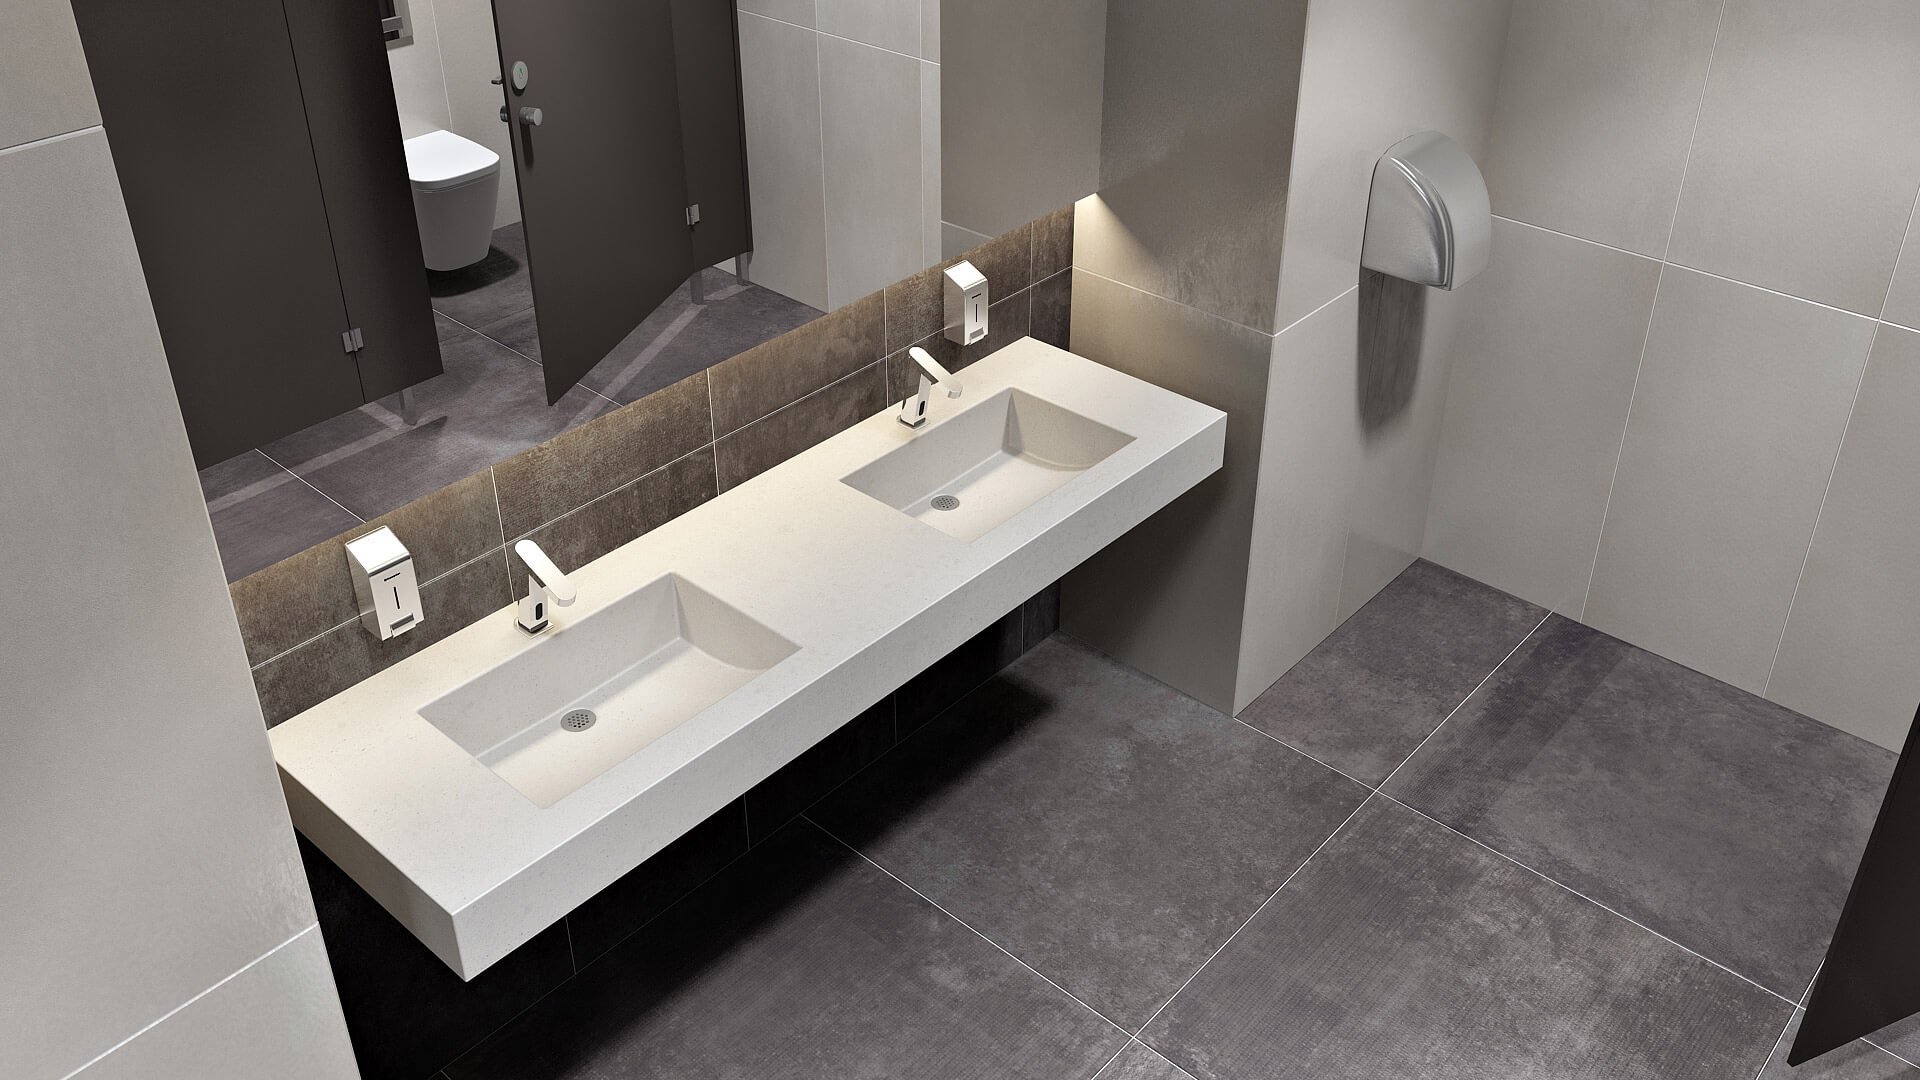 3D Bathroom Rendering with a Double Sink